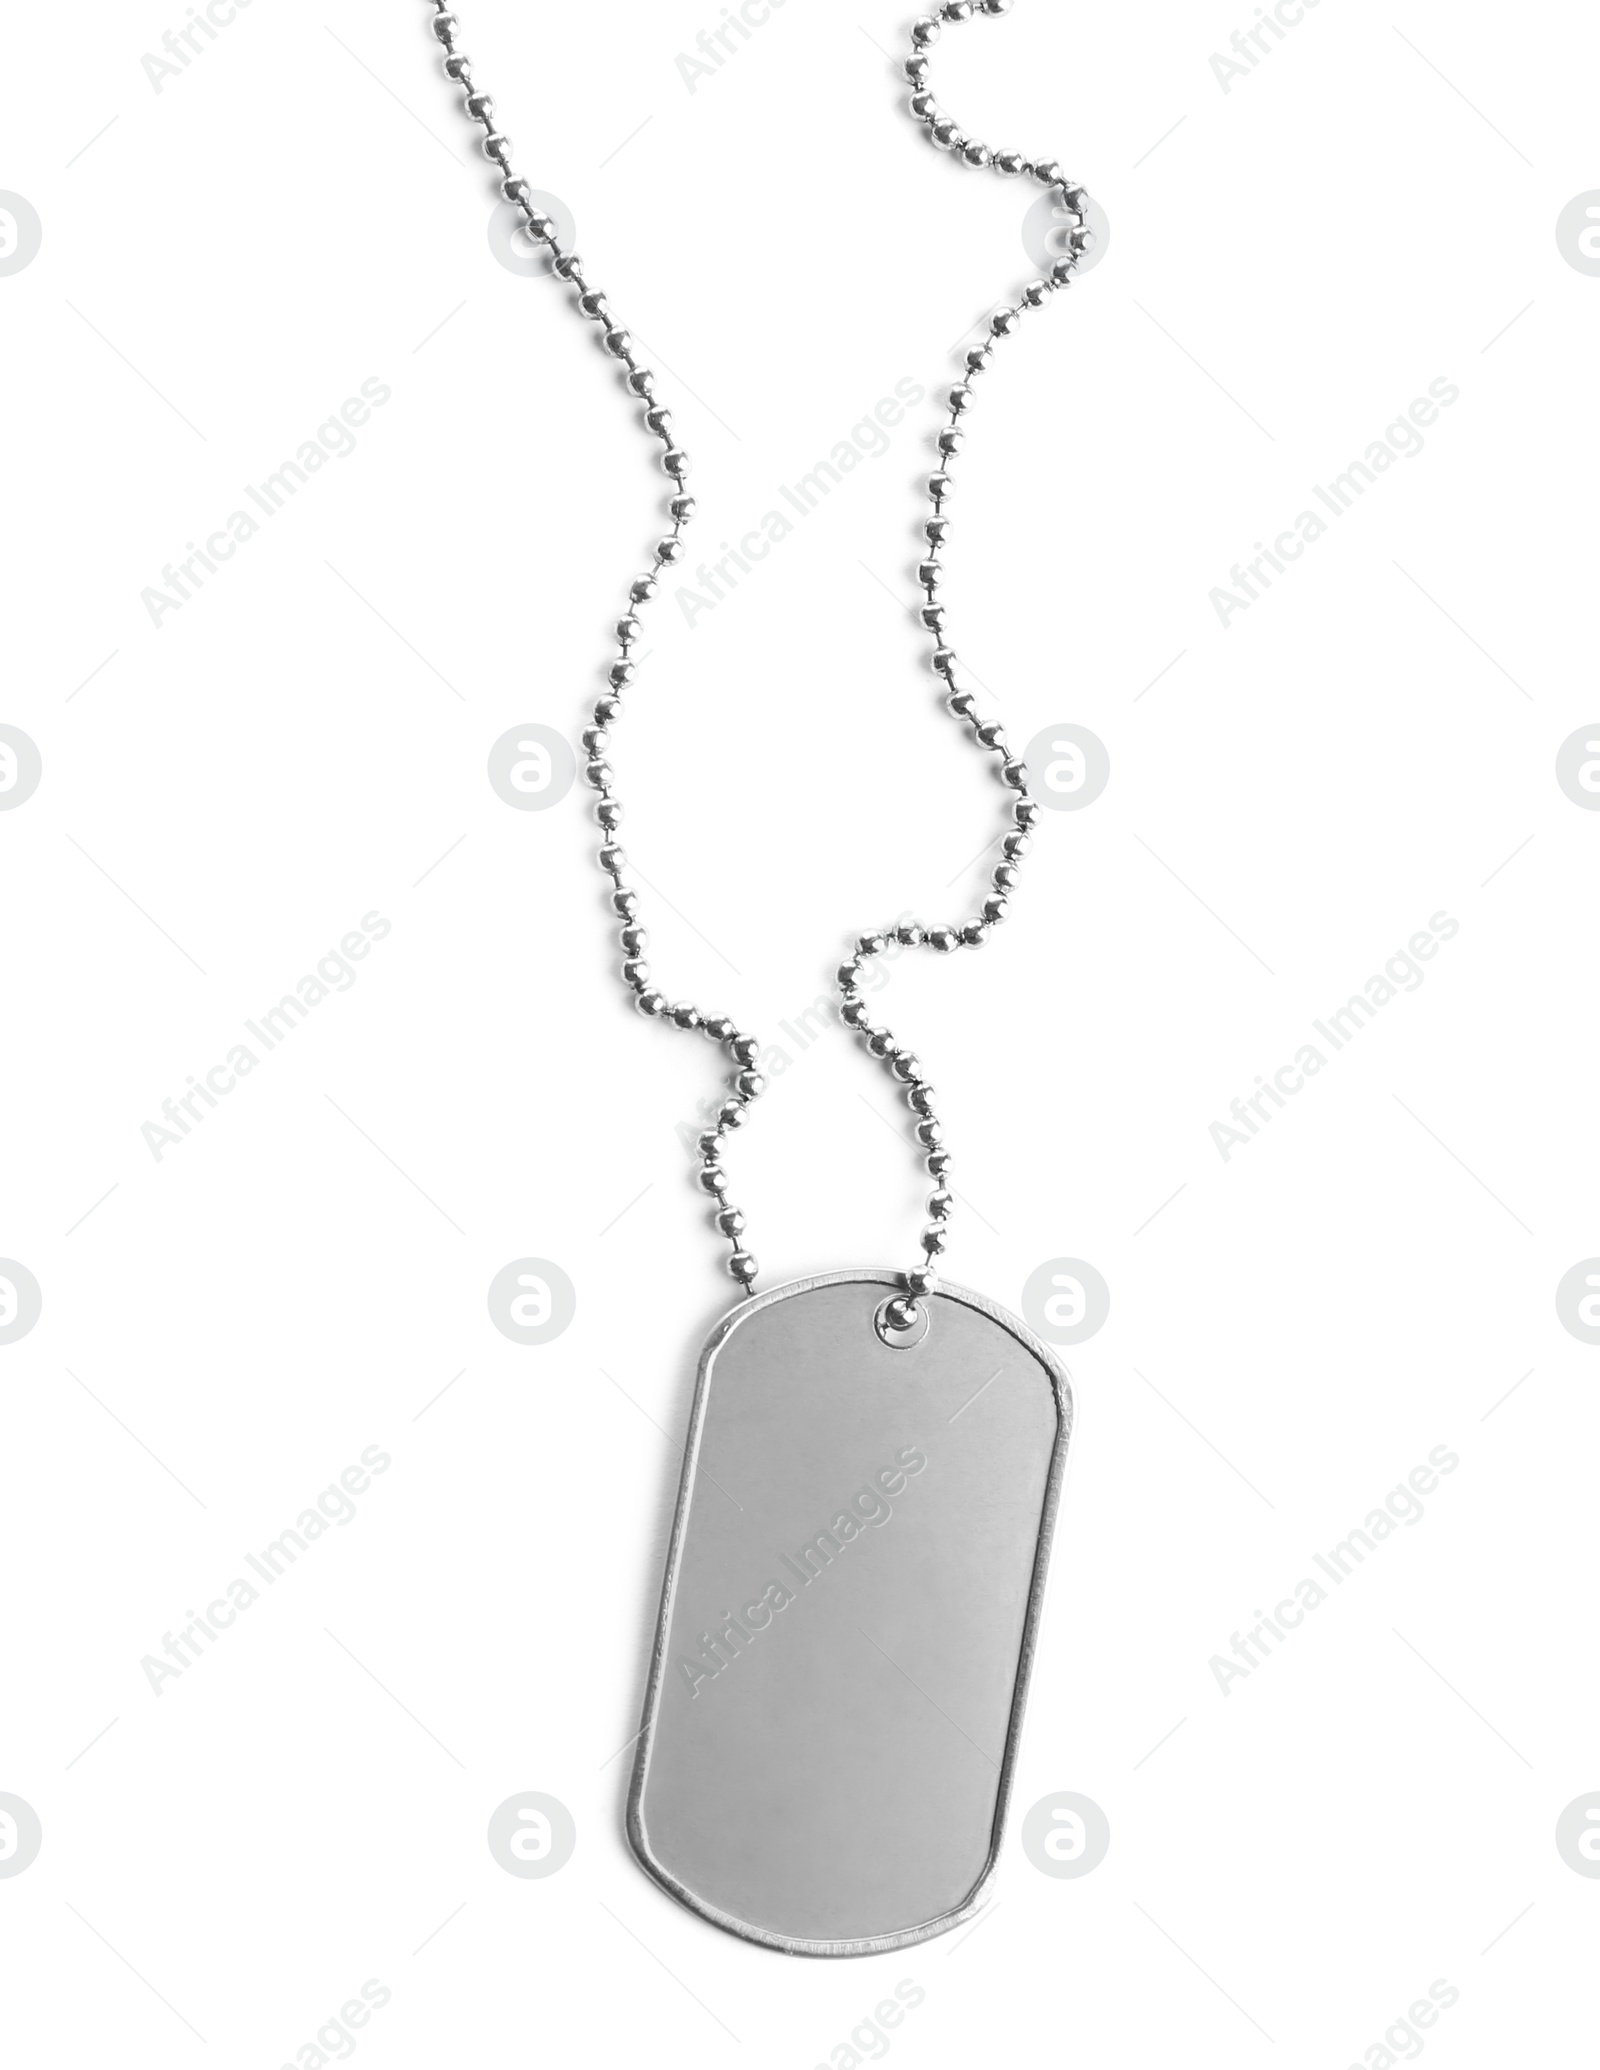 Photo of Blank military ID tag isolated on white